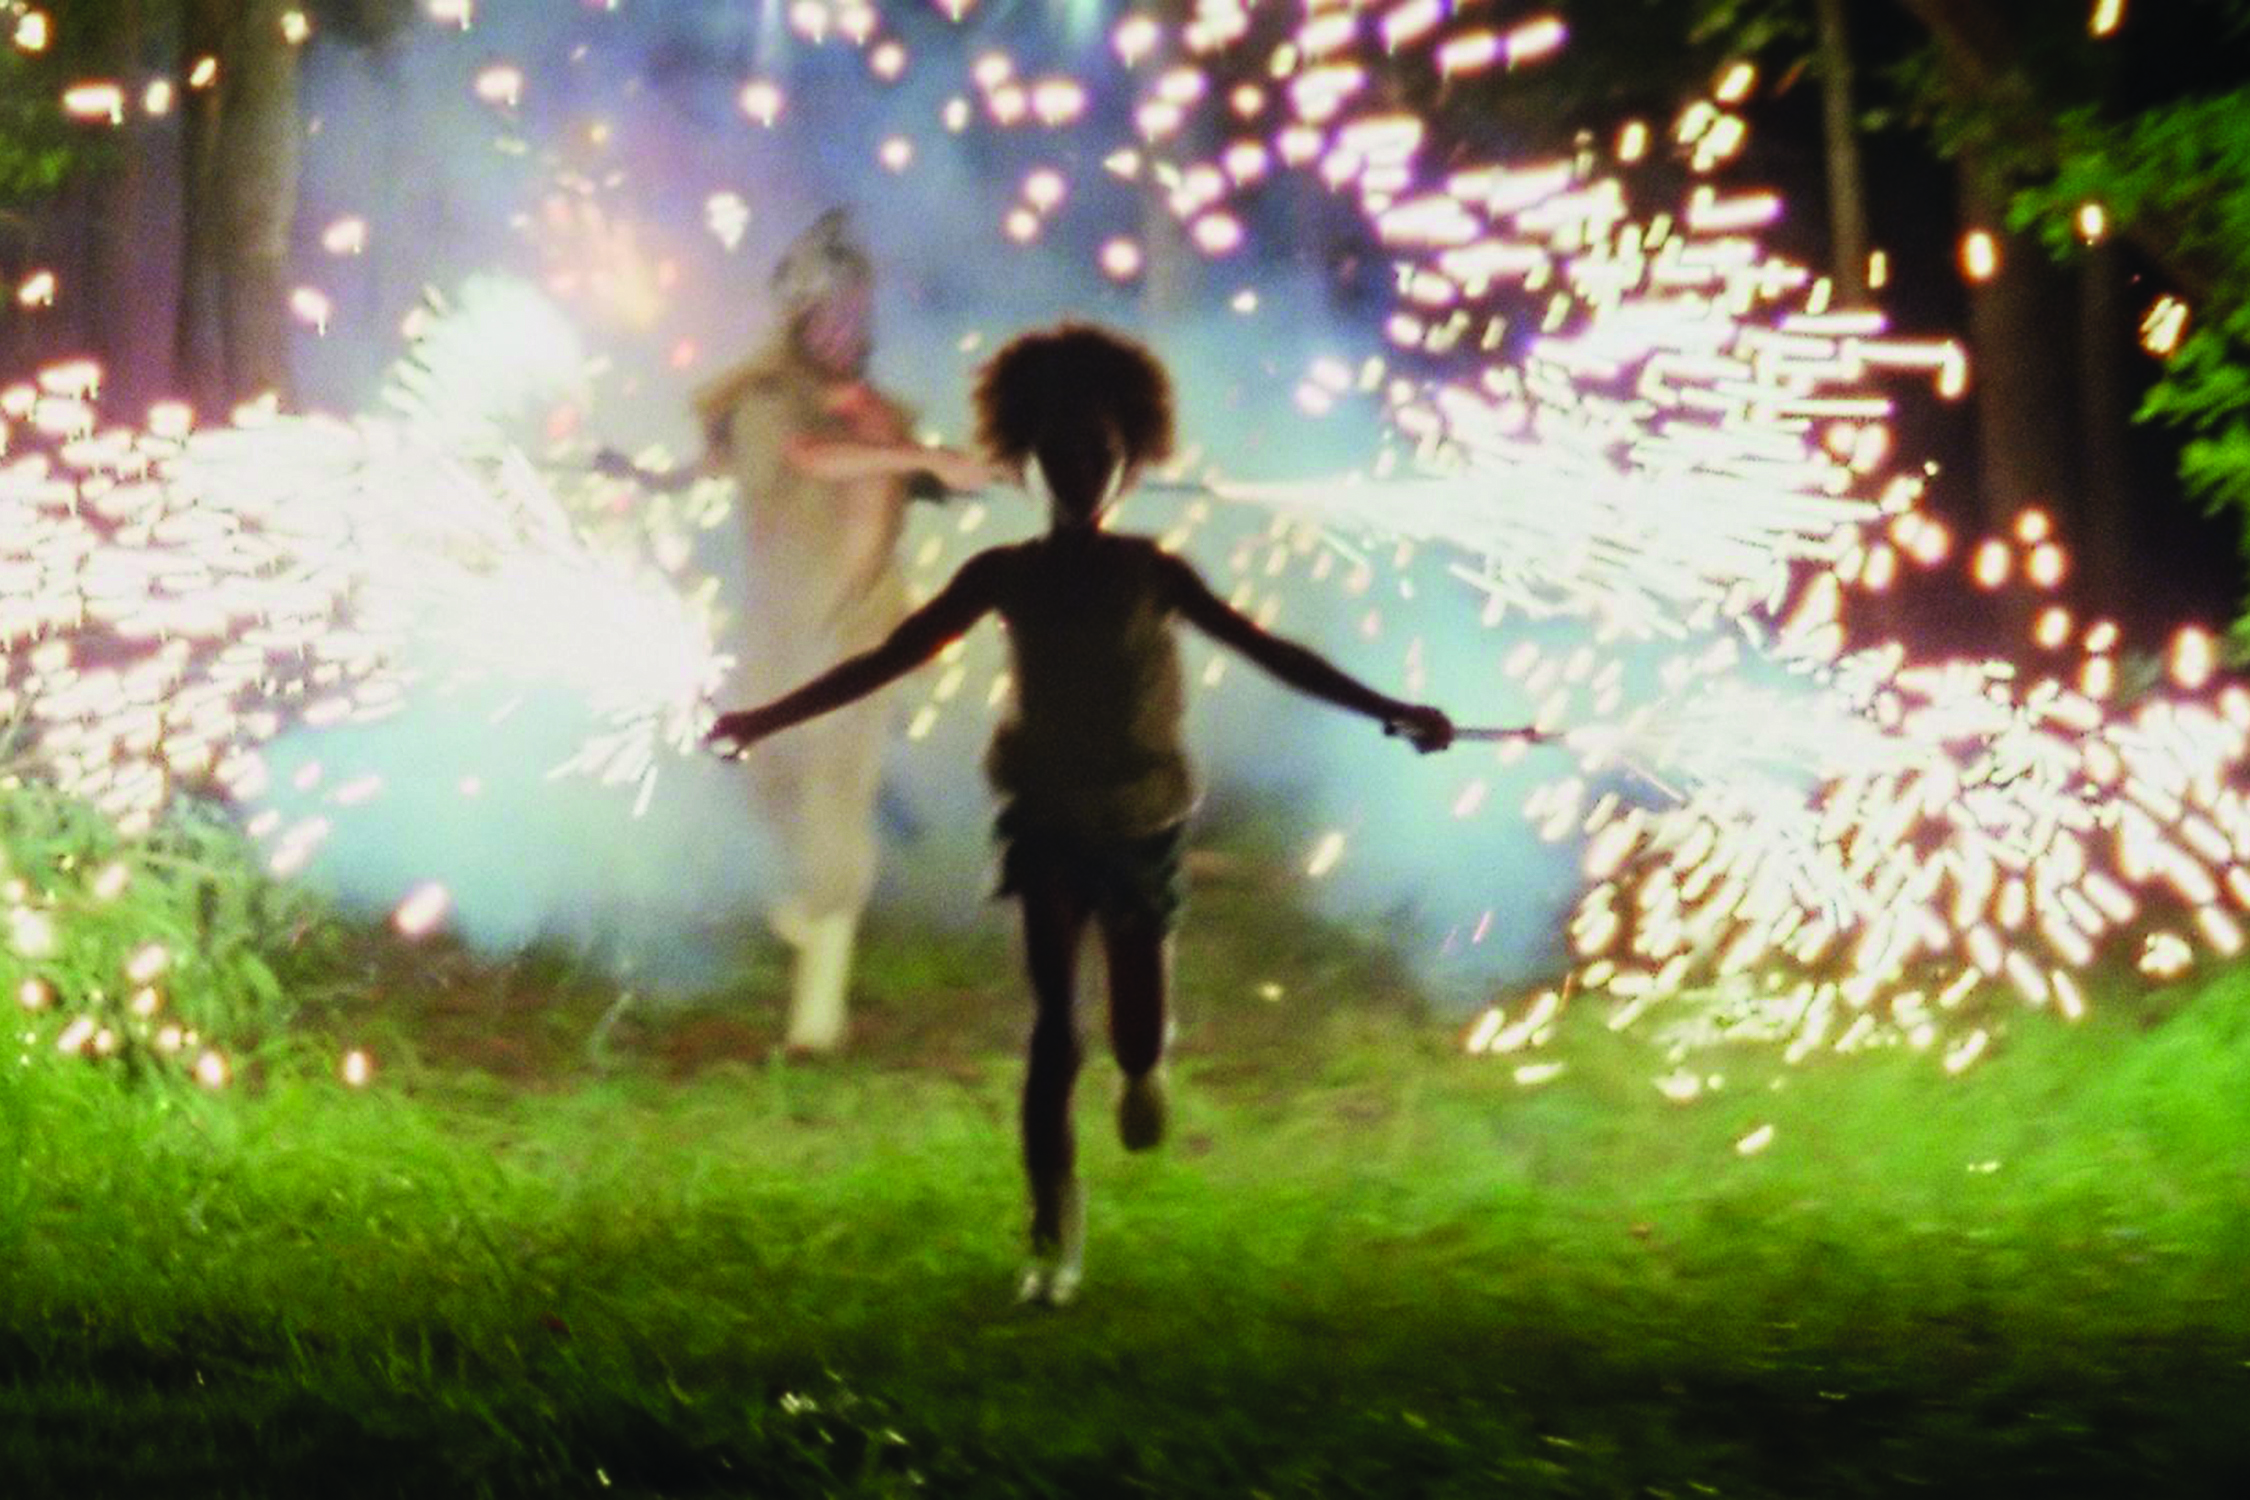 BEASTS OF THE SOUTHERN WILD Available Blu-ray/DVD December 4th